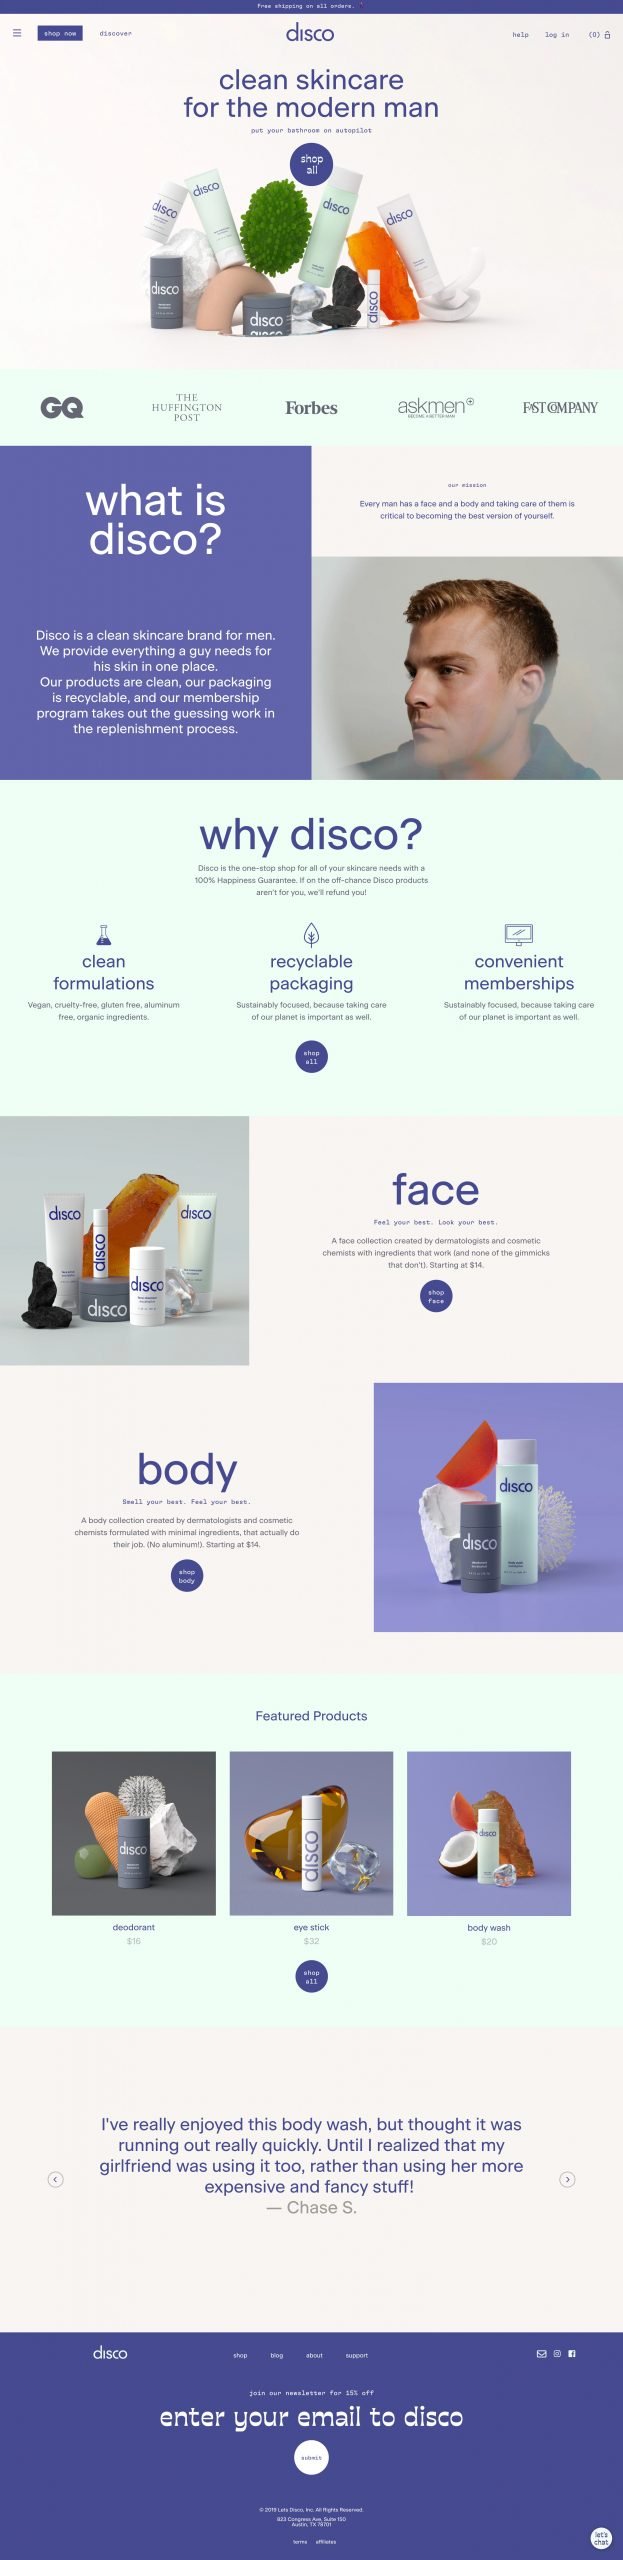 letsdisco.co – A Clean Skincare Brand’s Website for Men - Home Page